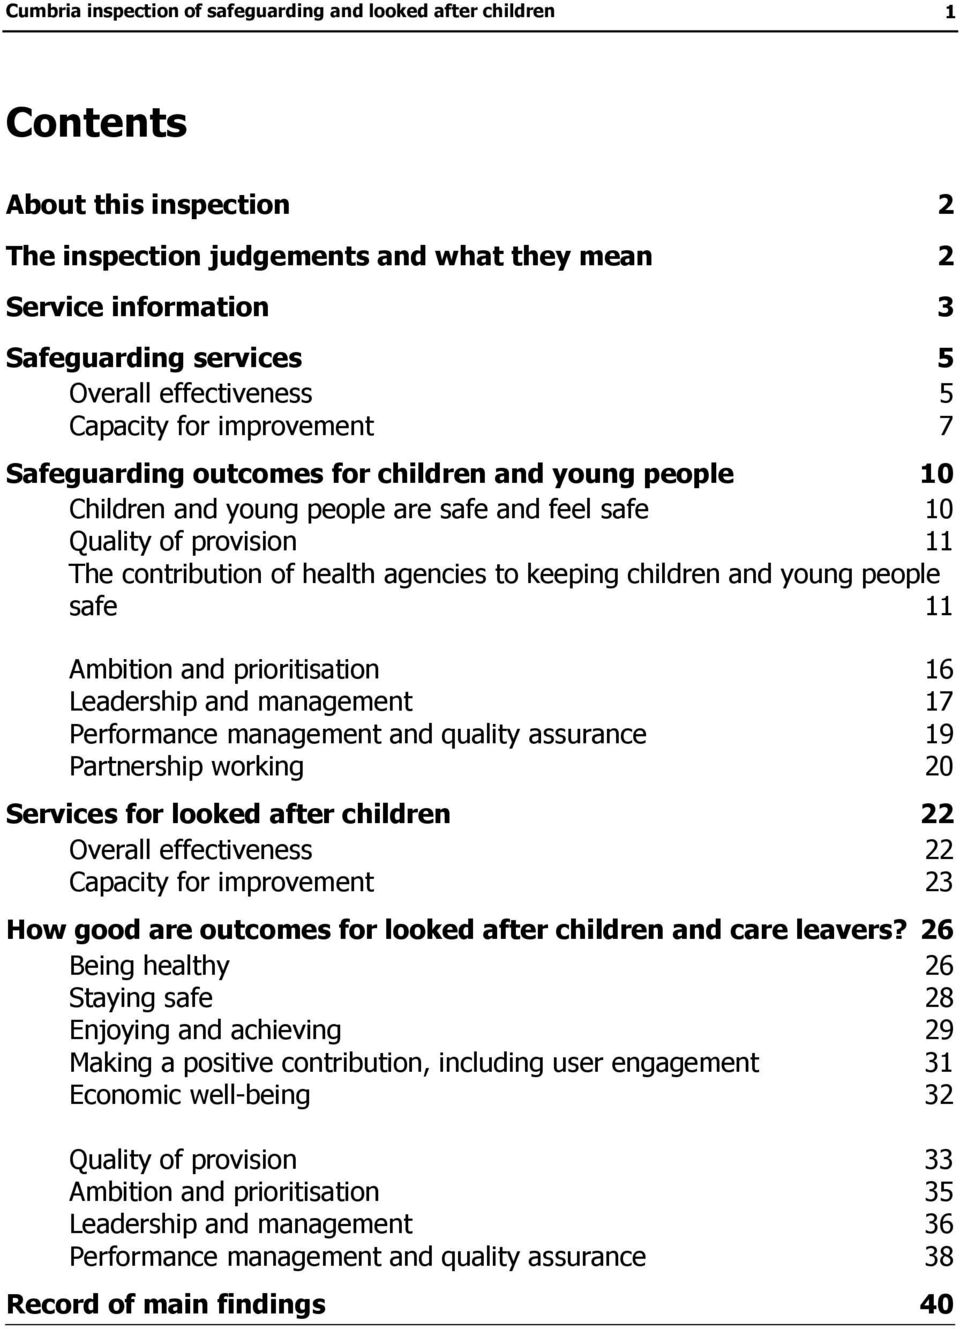 health agencies to keeping children and young people safe 11 Ambition and prioritisation 16 Leadership and management 17 Performance management and quality assurance 19 Partnership working 20